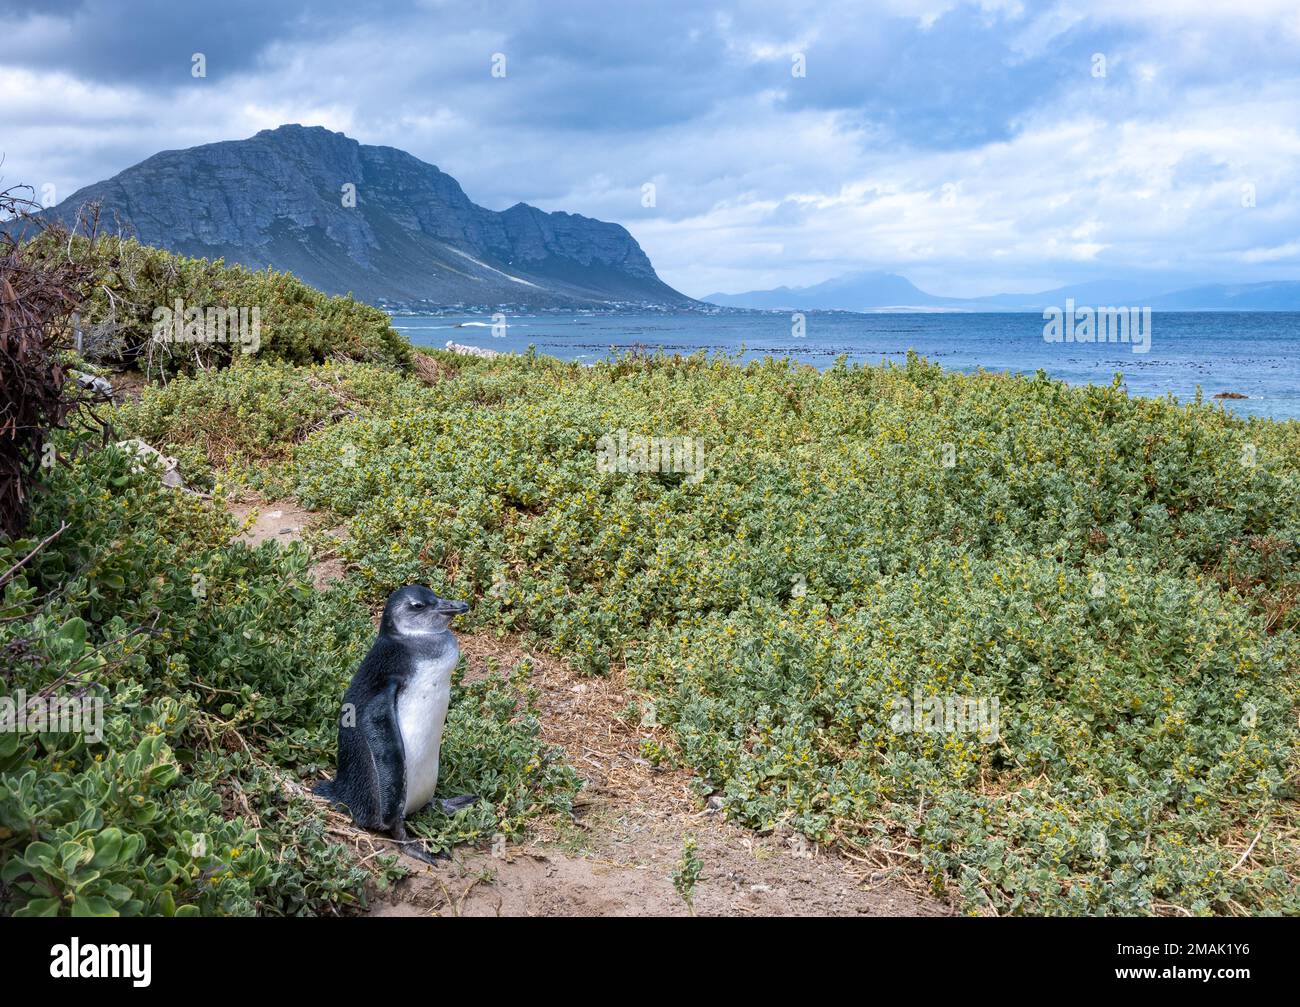 An juvenile African Penguin (Spheniscus demersus) at the Stony Point Nature Reserve, Cape Town, South Africa. Stock Photo